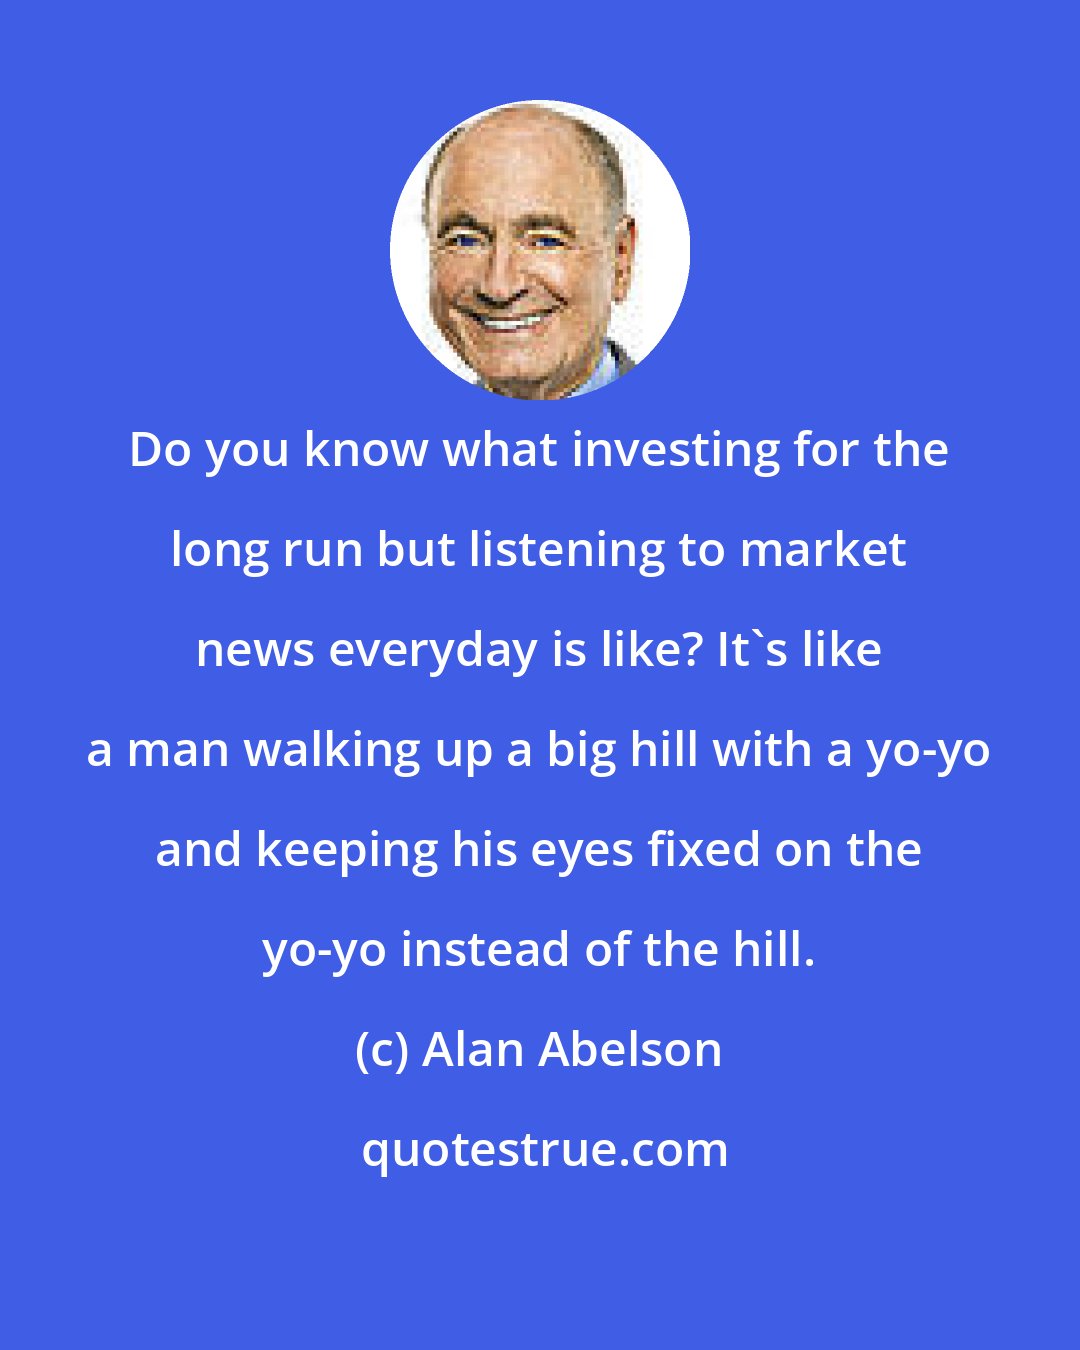 Alan Abelson: Do you know what investing for the long run but listening to market news everyday is like? It's like a man walking up a big hill with a yo-yo and keeping his eyes fixed on the yo-yo instead of the hill.